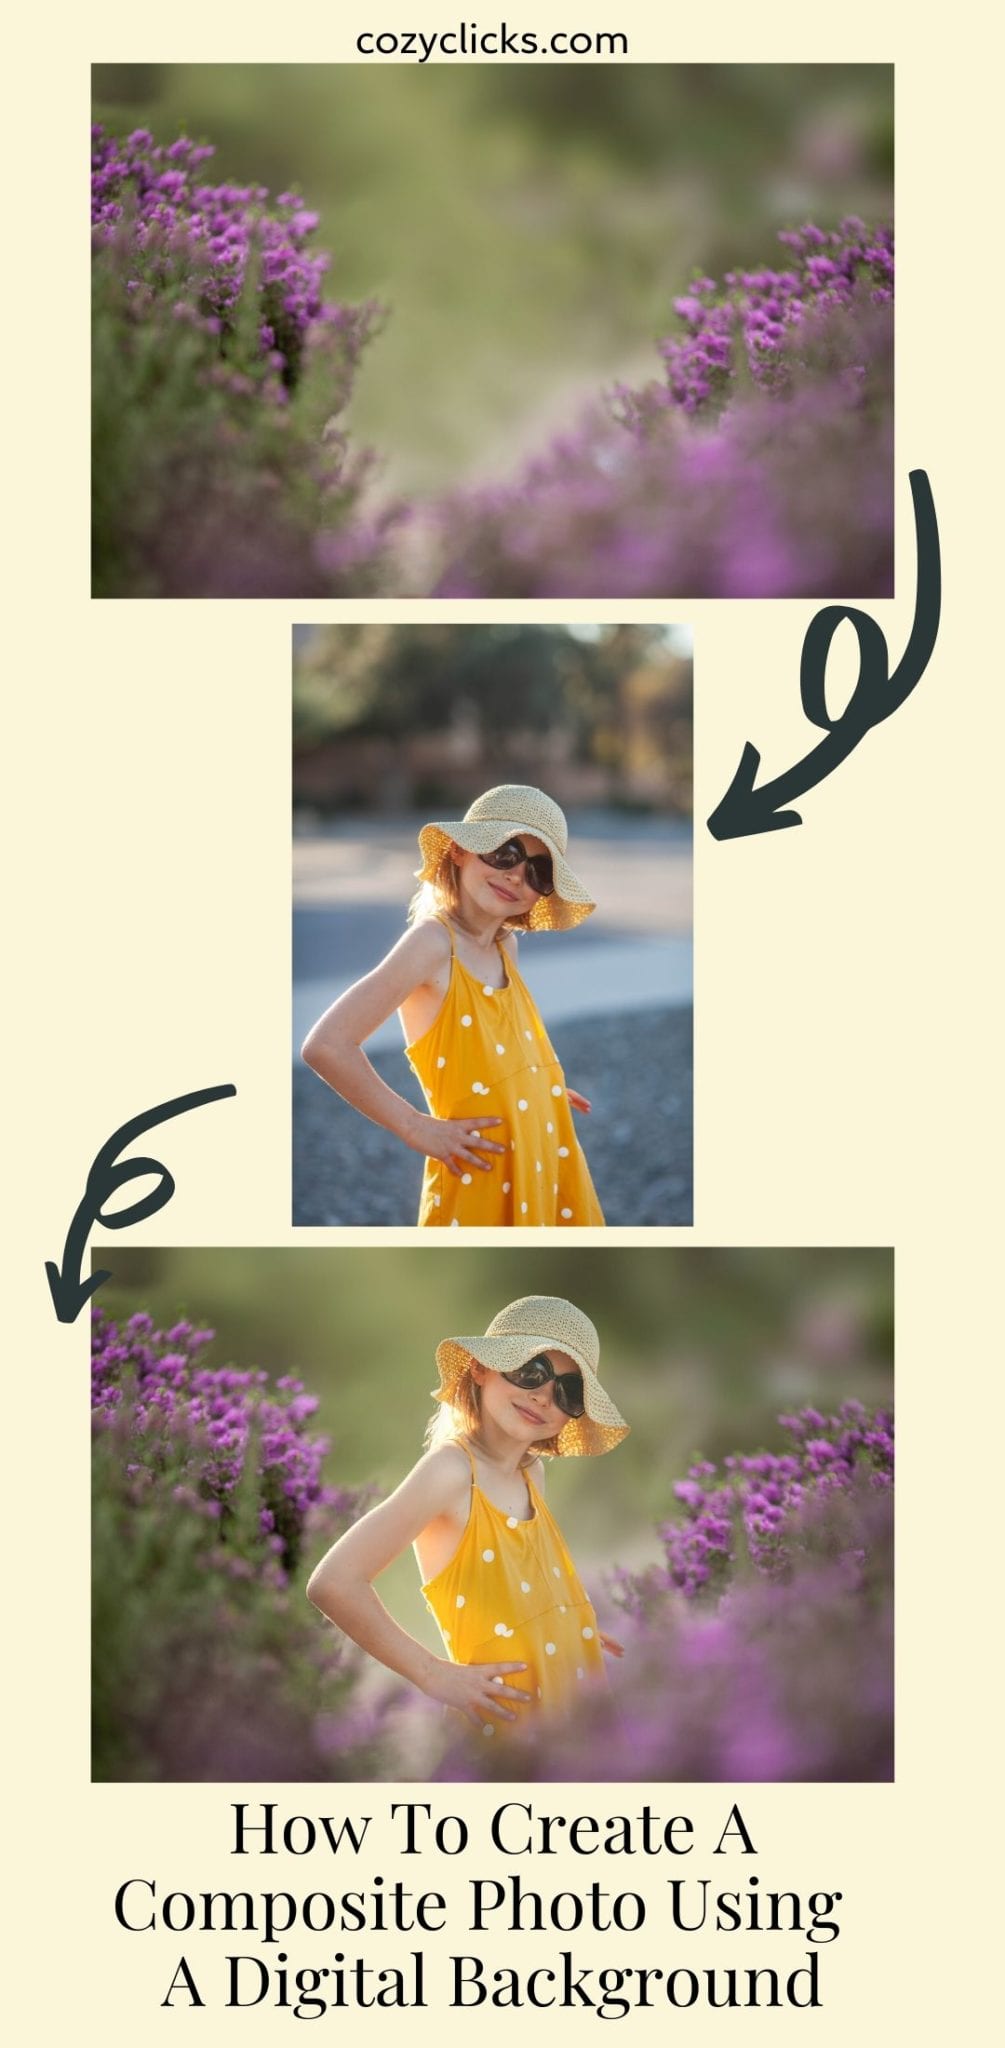 How To Create A Composite Photo Using  A Digital Background  The easy way to create a composite picture with digital backgrounds